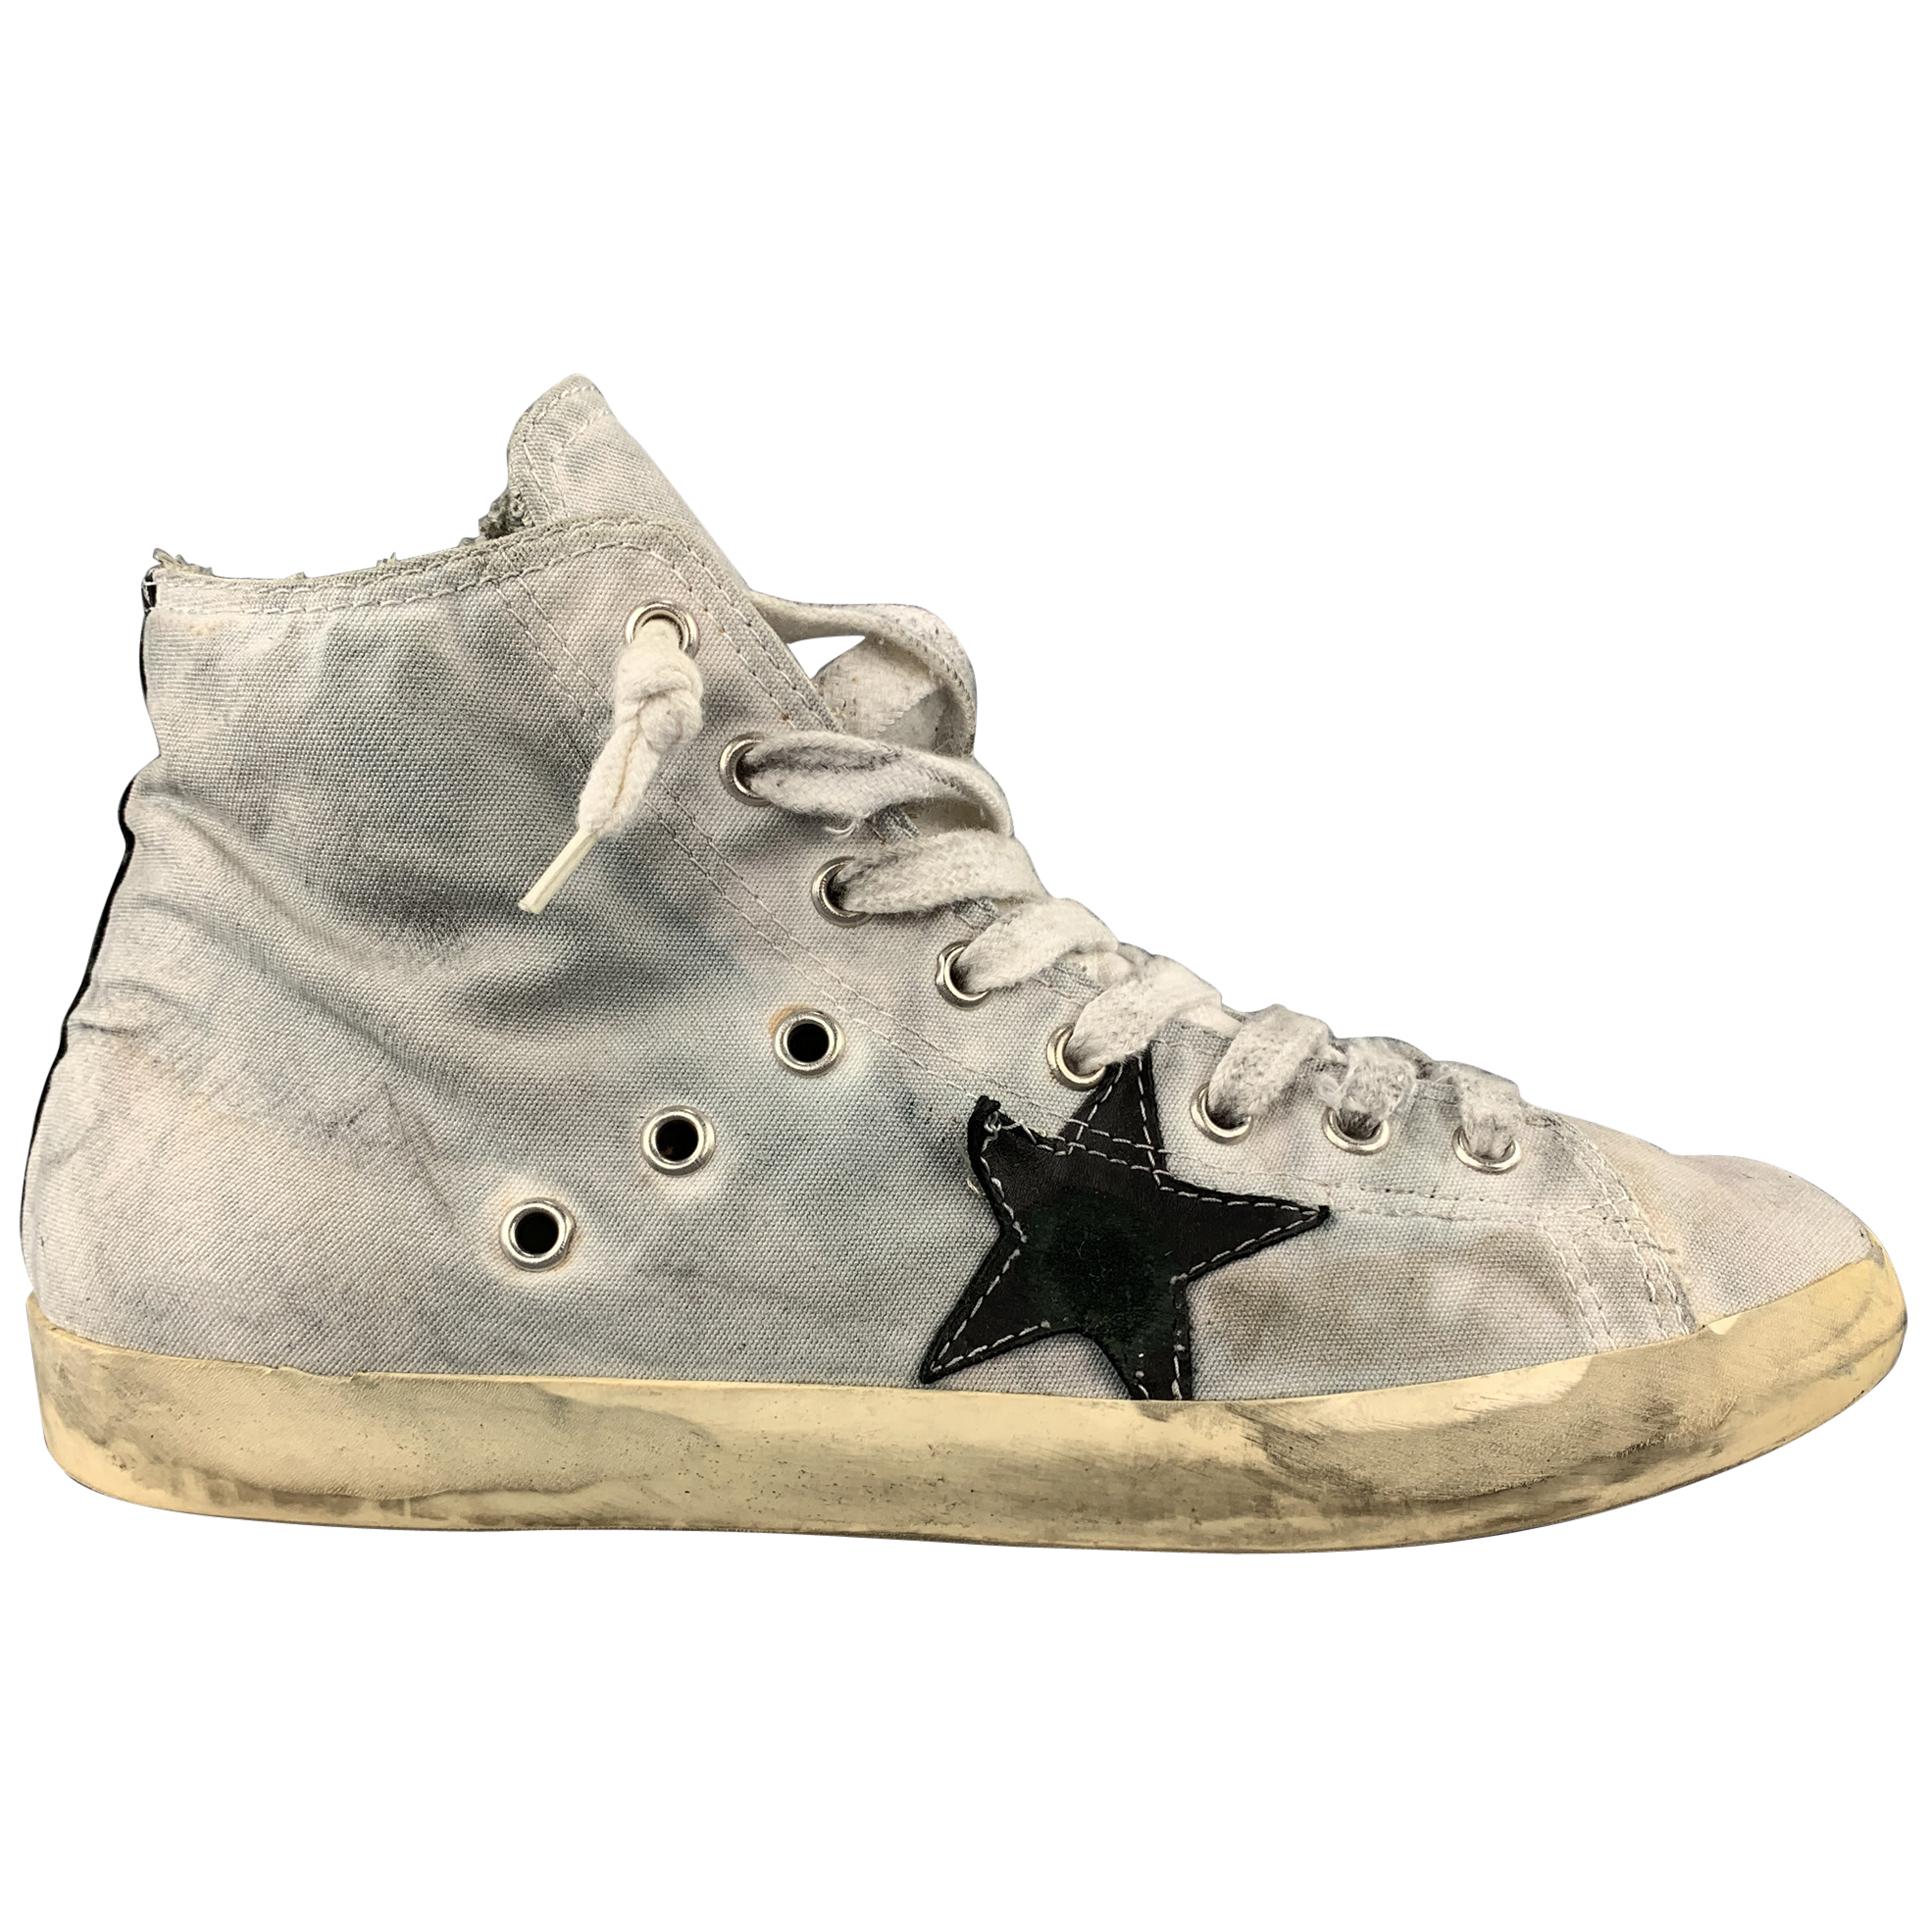 GOLDEN GOOSE 'Private Shos Sport' Collection Size 10 Gray Canvas Distressed Snea